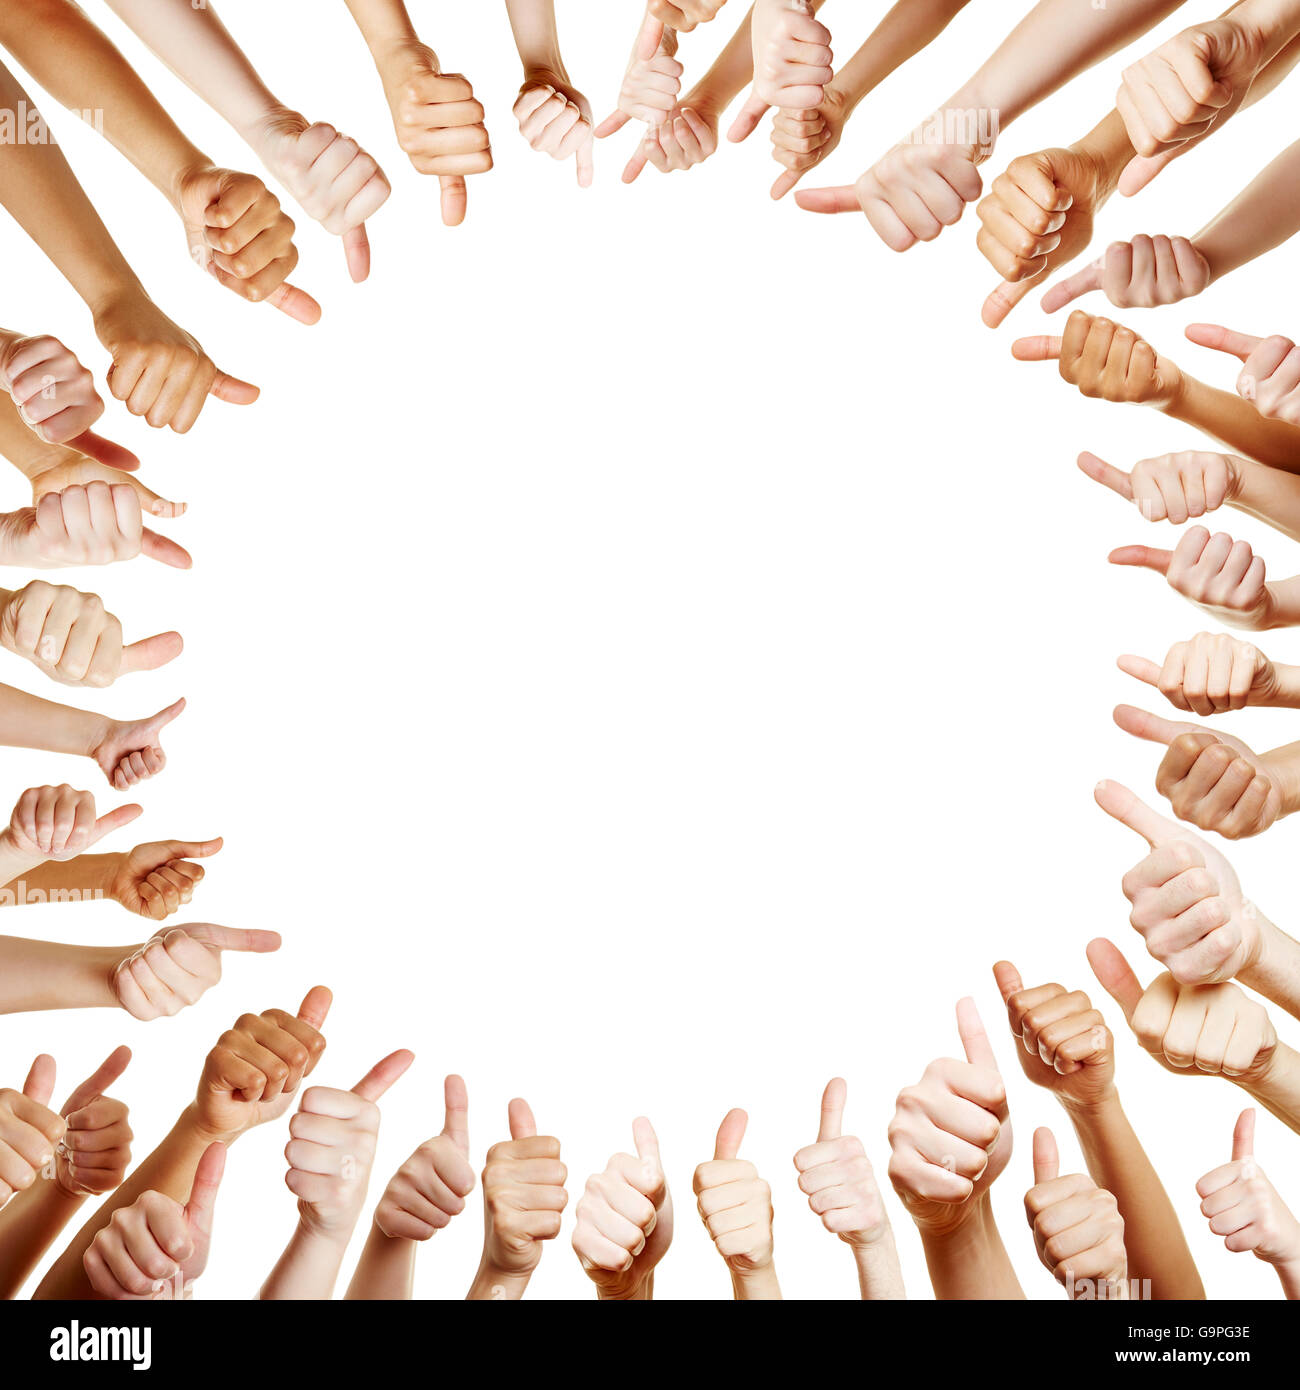 Many hands holding thumbs up as a circle background Stock Photo